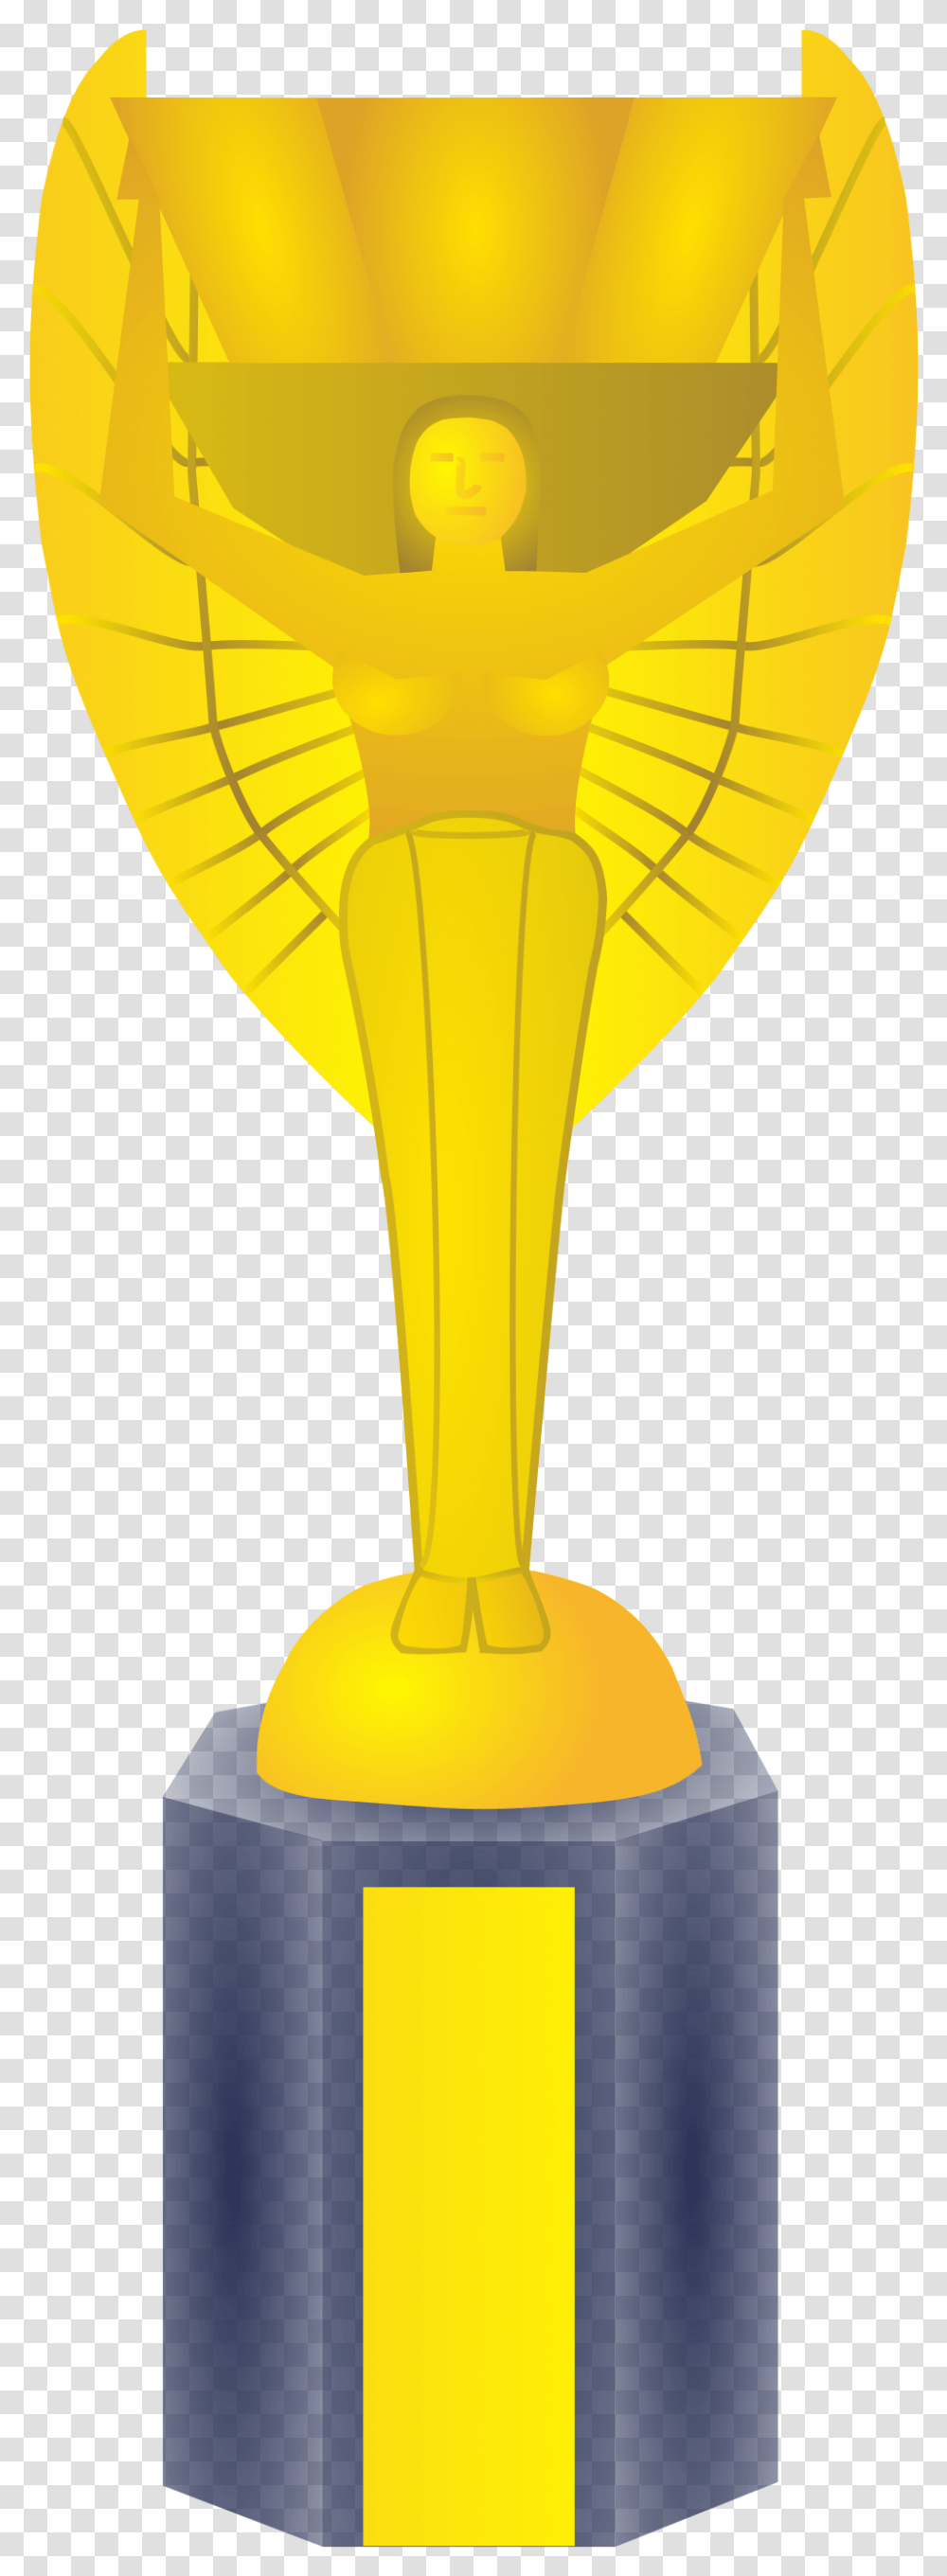 Football World Cup Old, Lamp, Food, Light, Trophy Transparent Png